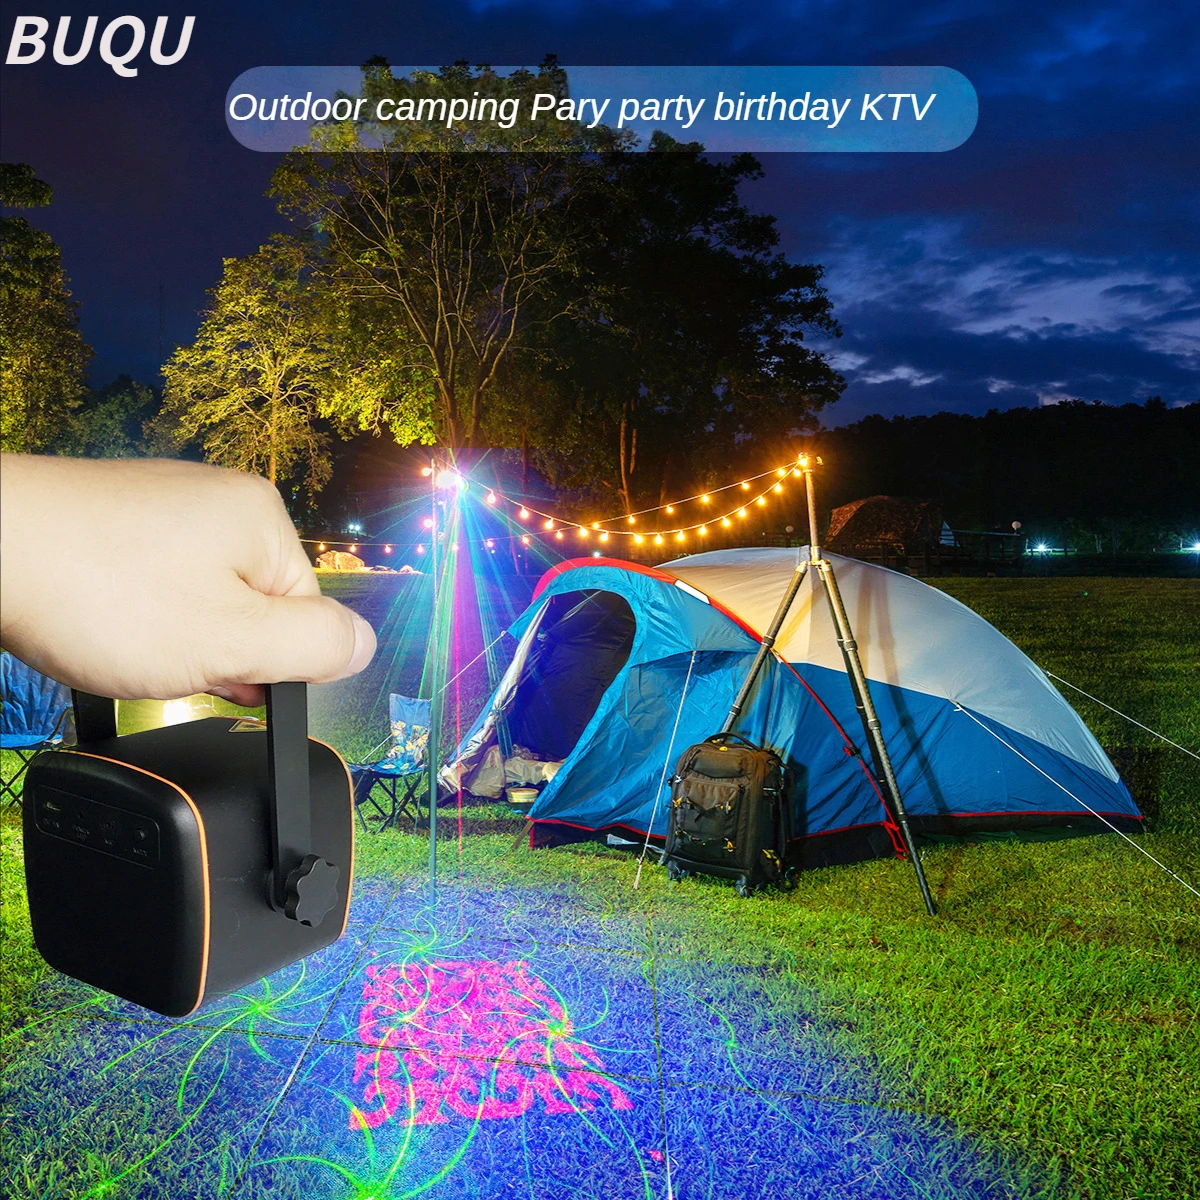 BUQU 2022 new mini laser light 60 pattern USB star dome KTV bar atmosphere Projection light family camping stage light